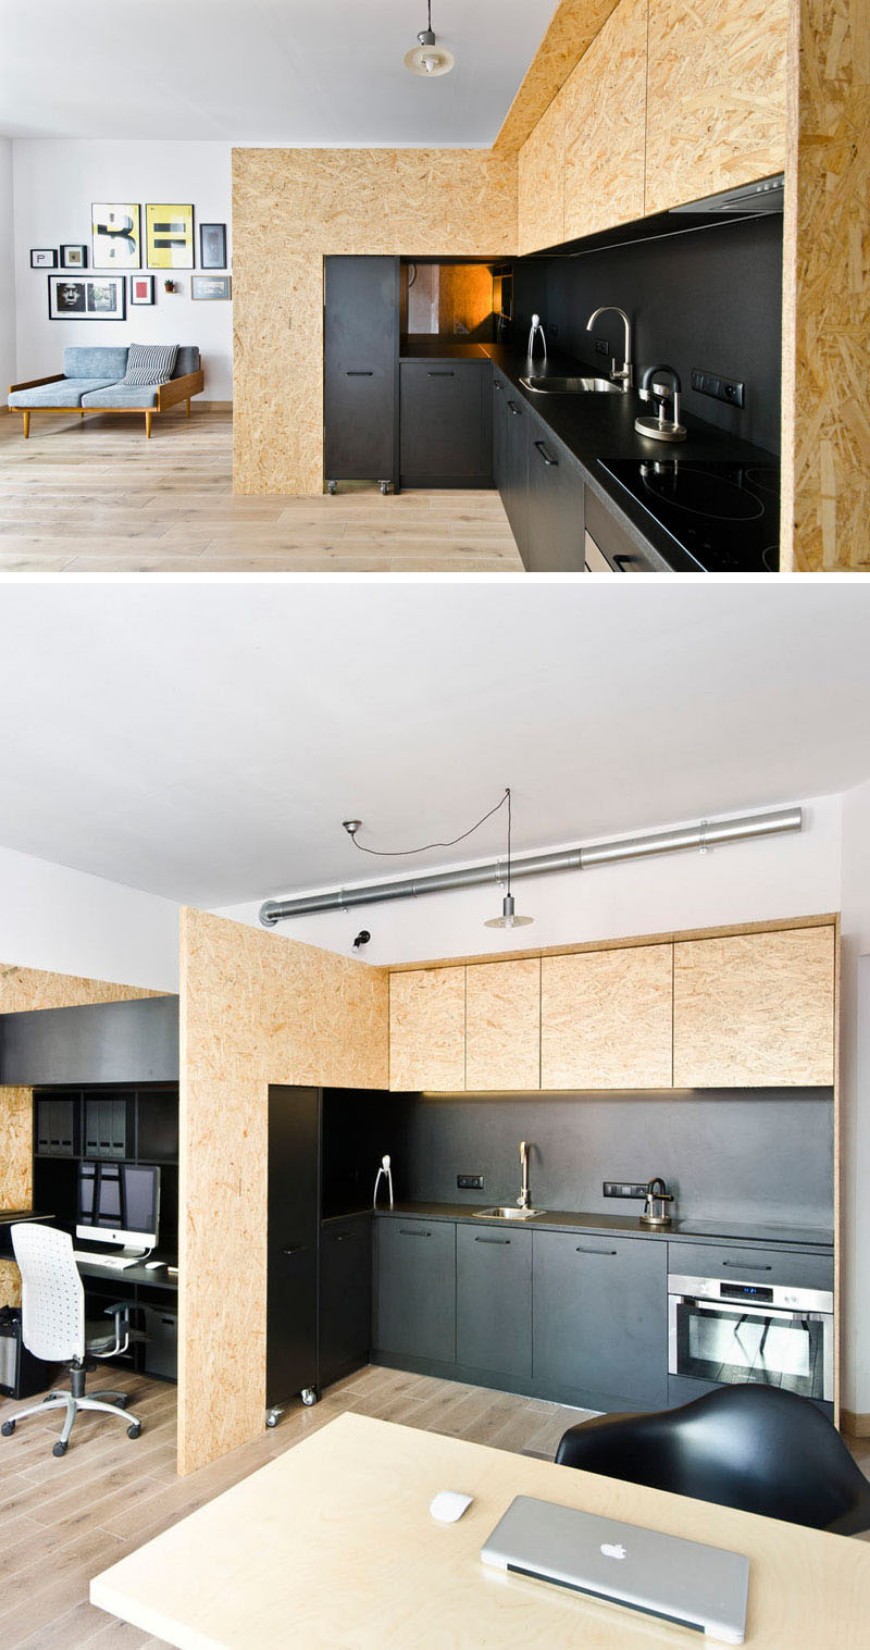 Modern Kitchens That Make The Most Of A Small Space